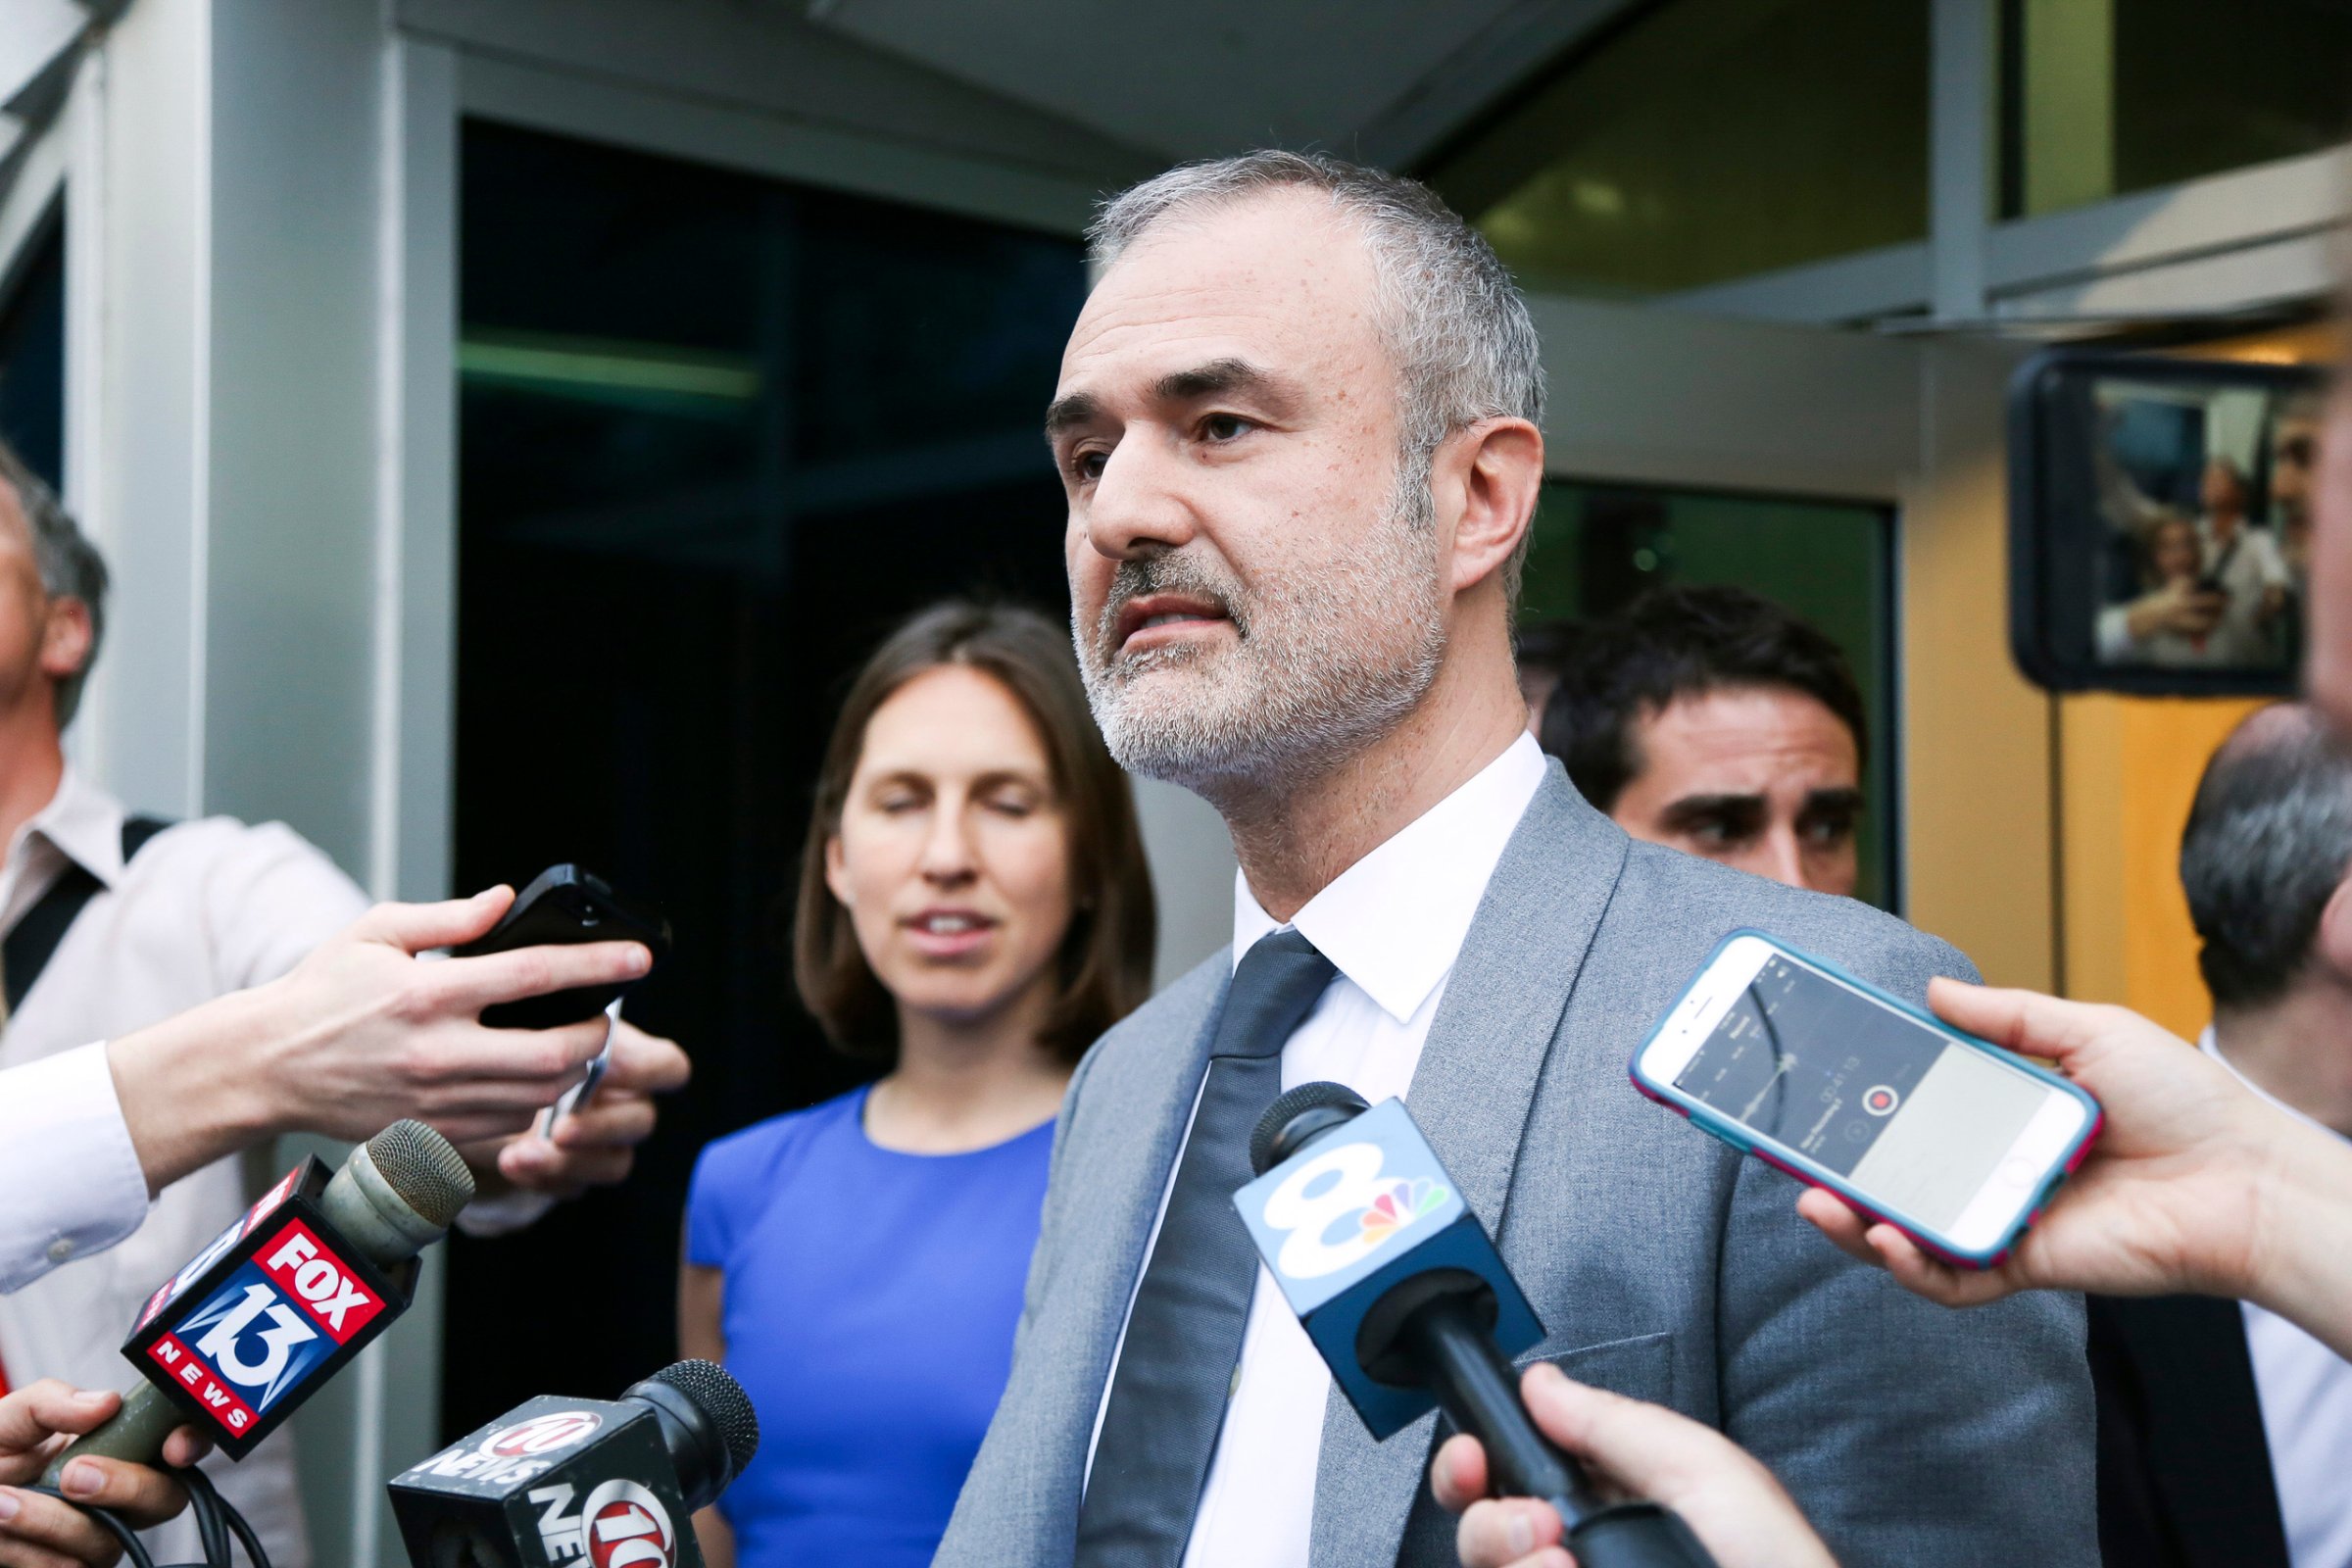 Gawker founder Nick Denton speaks to the media, in St. Petersburg, Fla. on March 18, 2016.